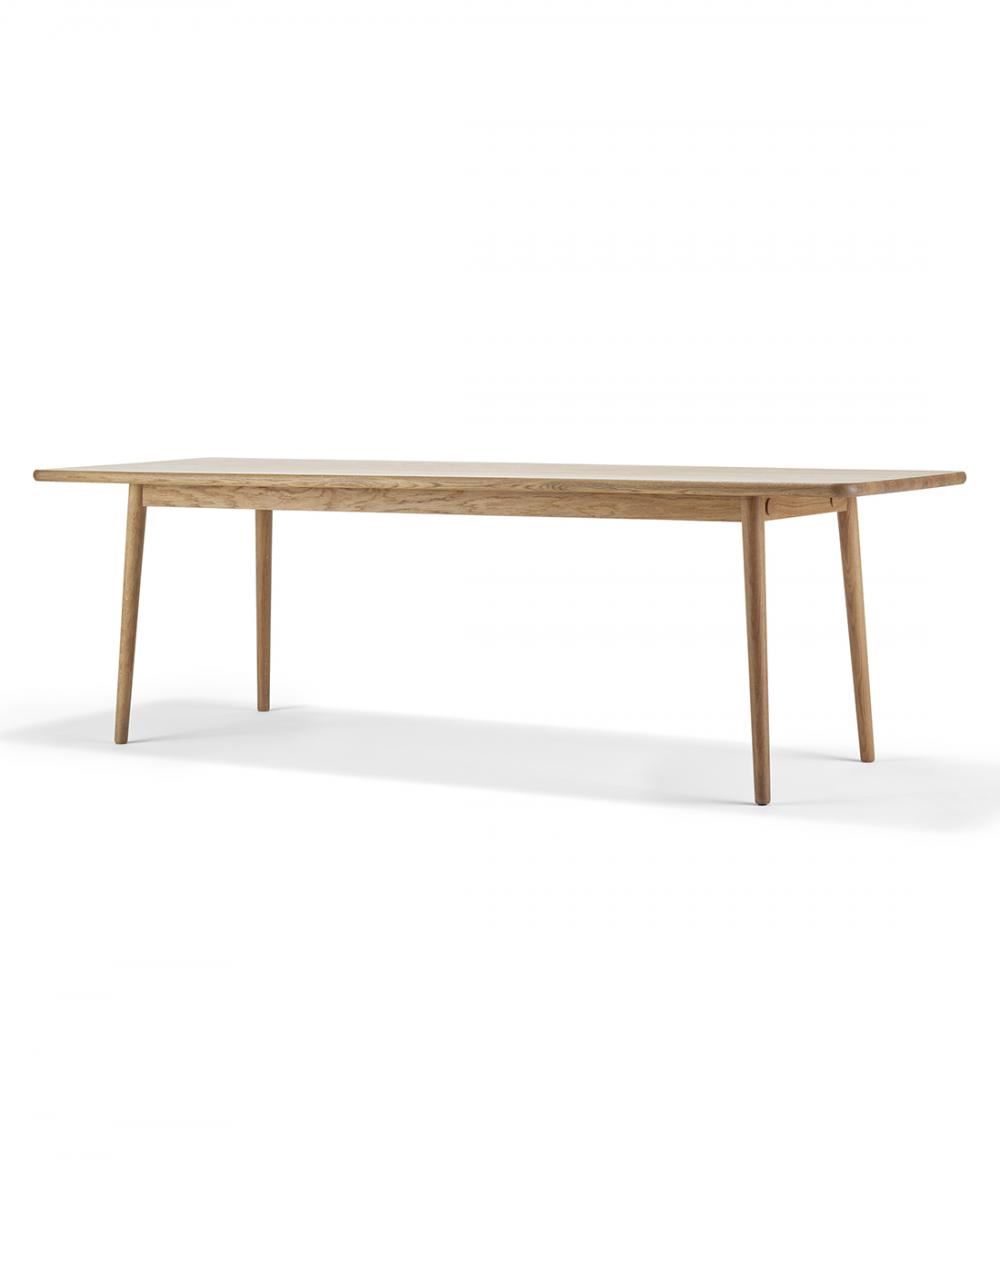 Stolab Miss Holly Table Rectangular Oak 175 X 82cm With 2 Extension Plate Light Wood Designer Furniture From Holloways Of Ludlow